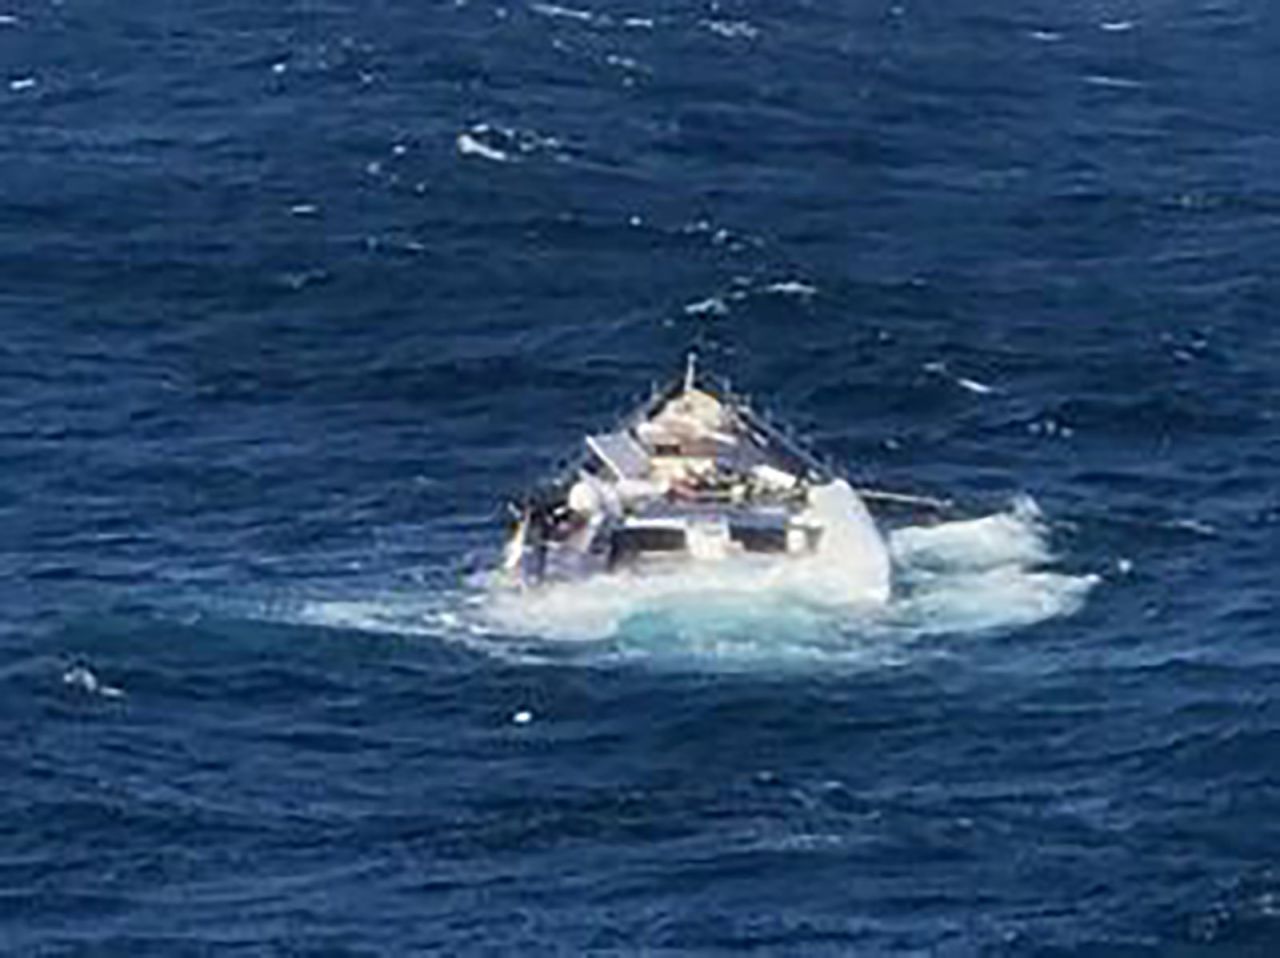 The prize-winning boat fell from a cargo ship into the sea, and was later pictured half-submerged.